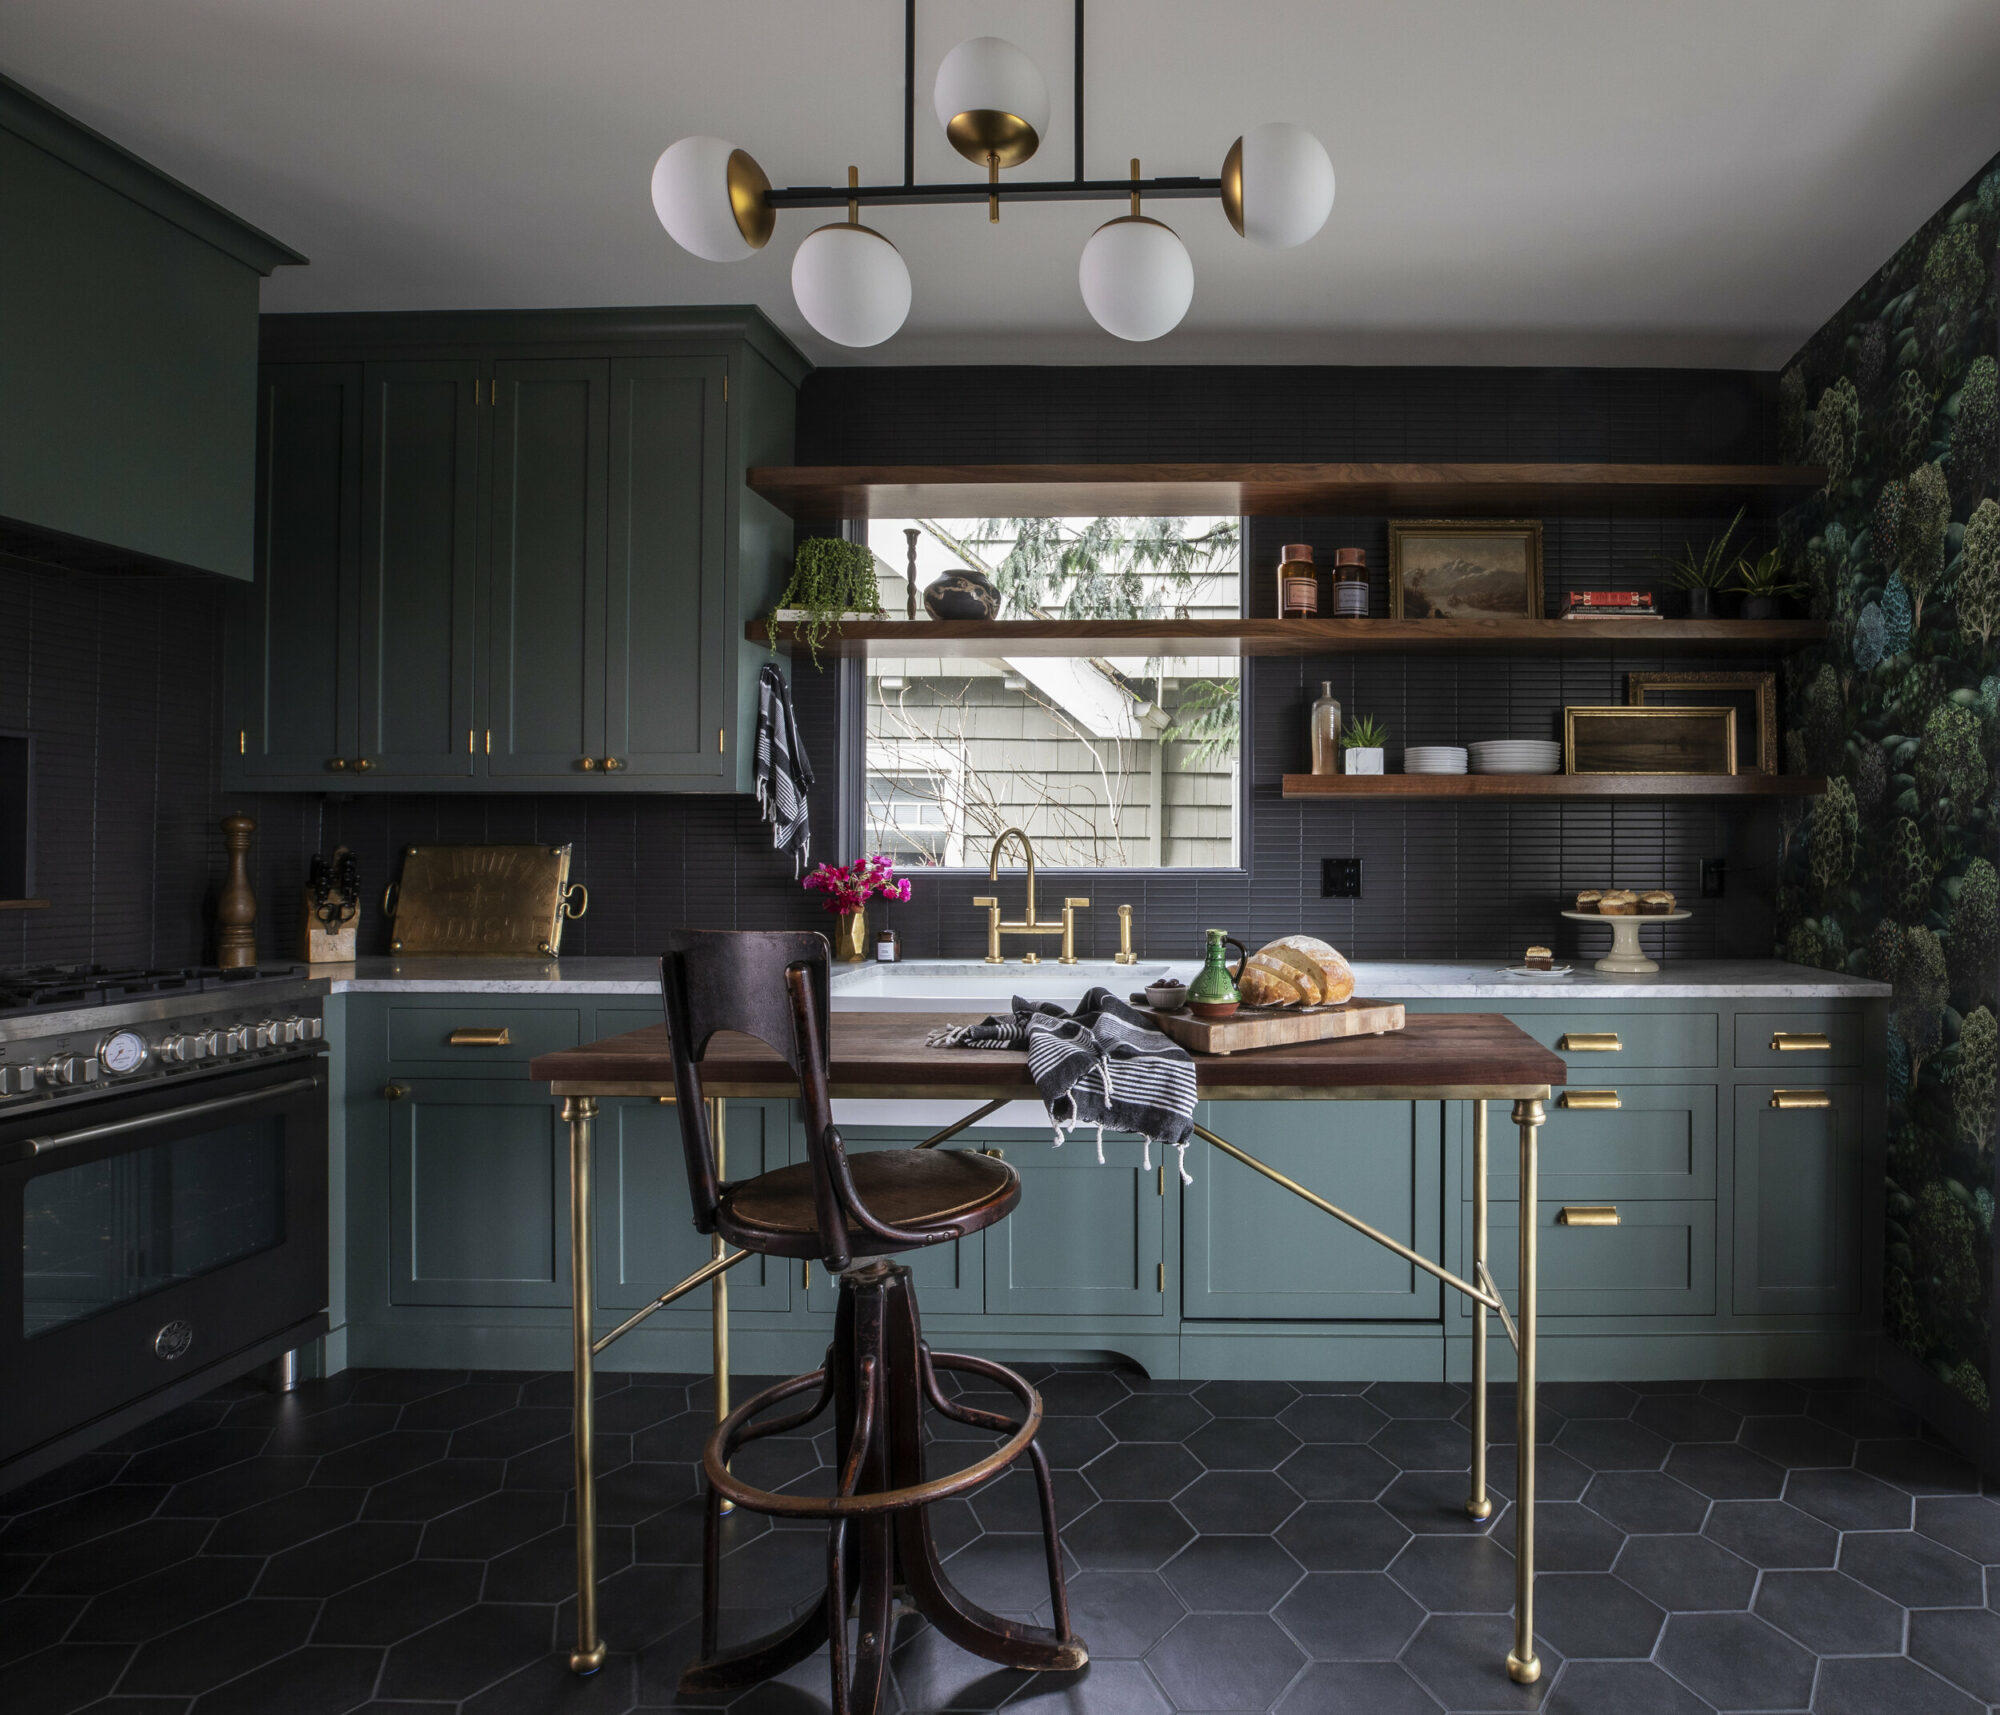 kitchen with dark green cabinetry, black tile flooring and wood table and chair